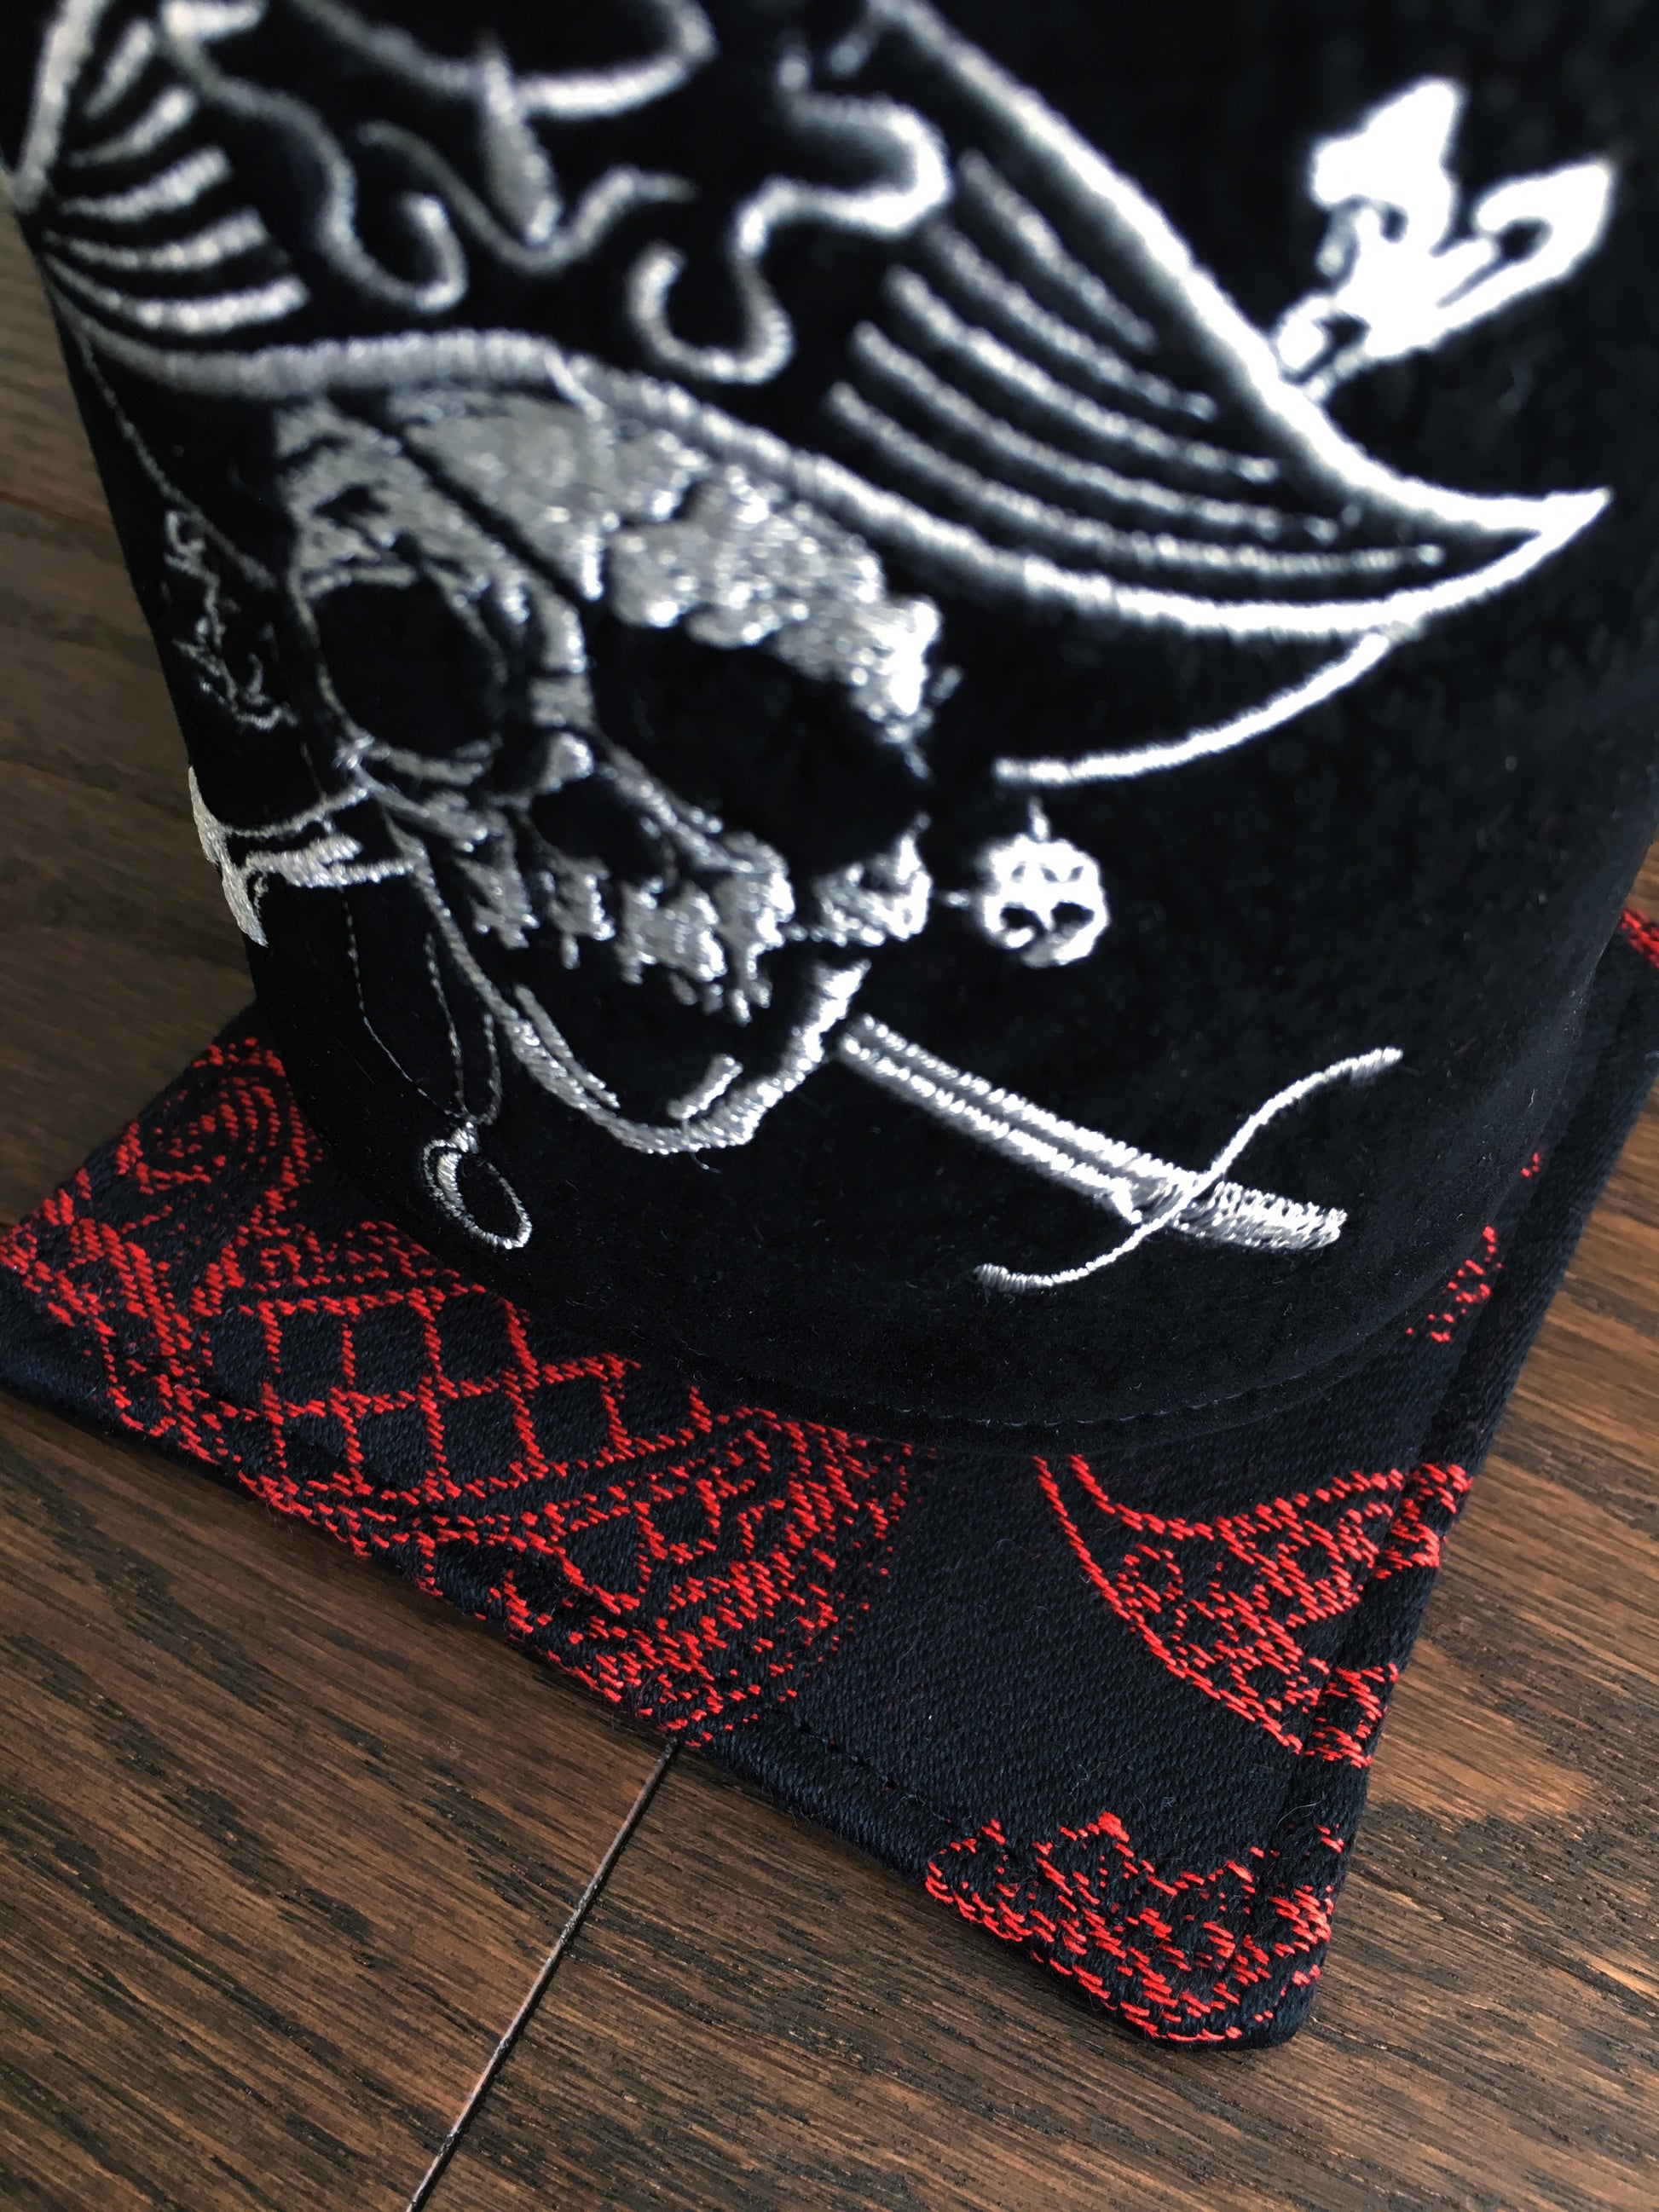 Image of a bold and handmade pirate themed mug rug. It features red and black paisley skull wrap scraps on one side and a blood red skull and crossbones embroidery design on the reverse.